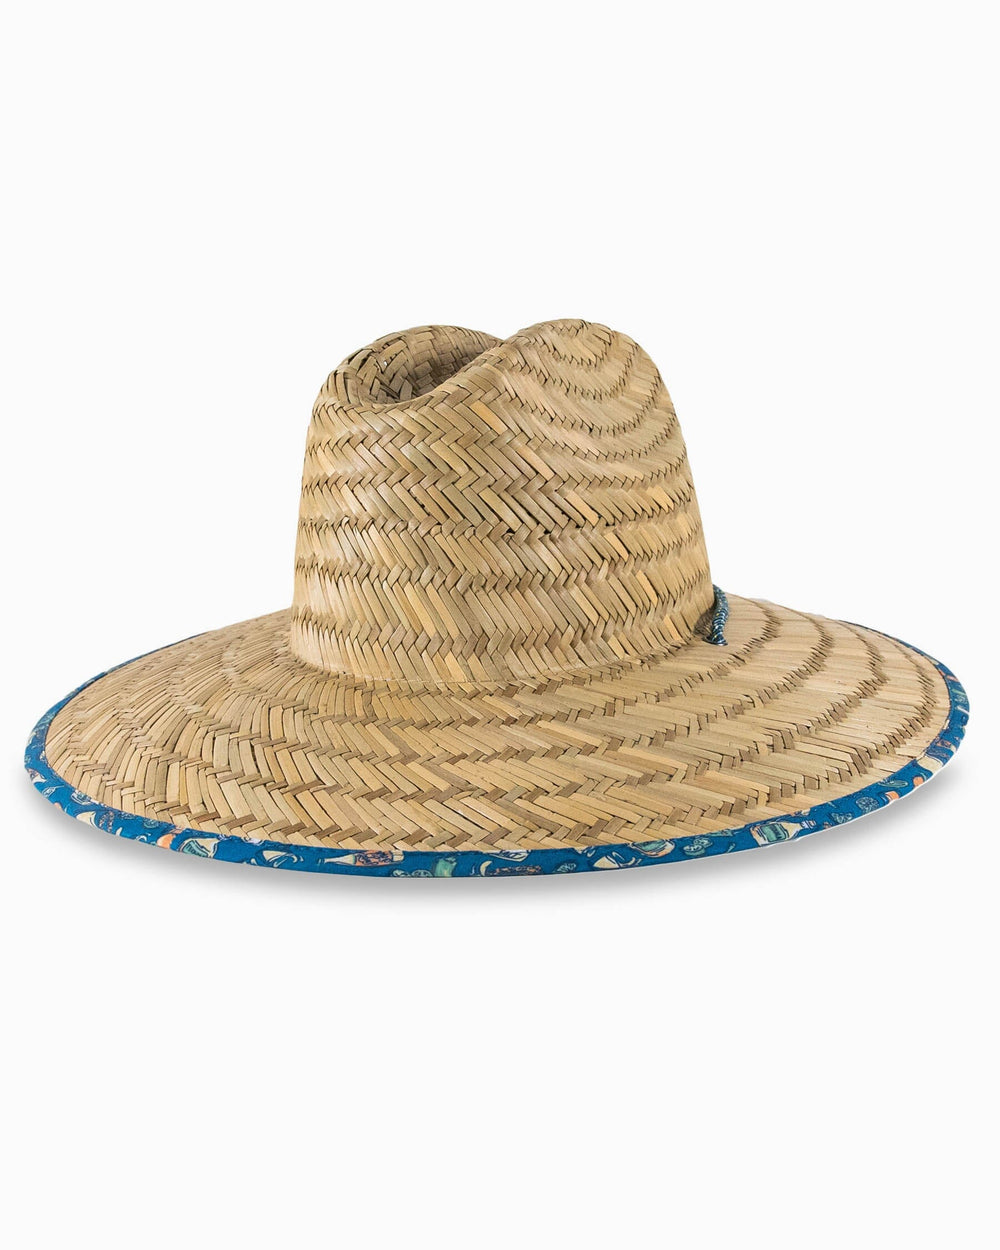 Marg Madness Straw Hat